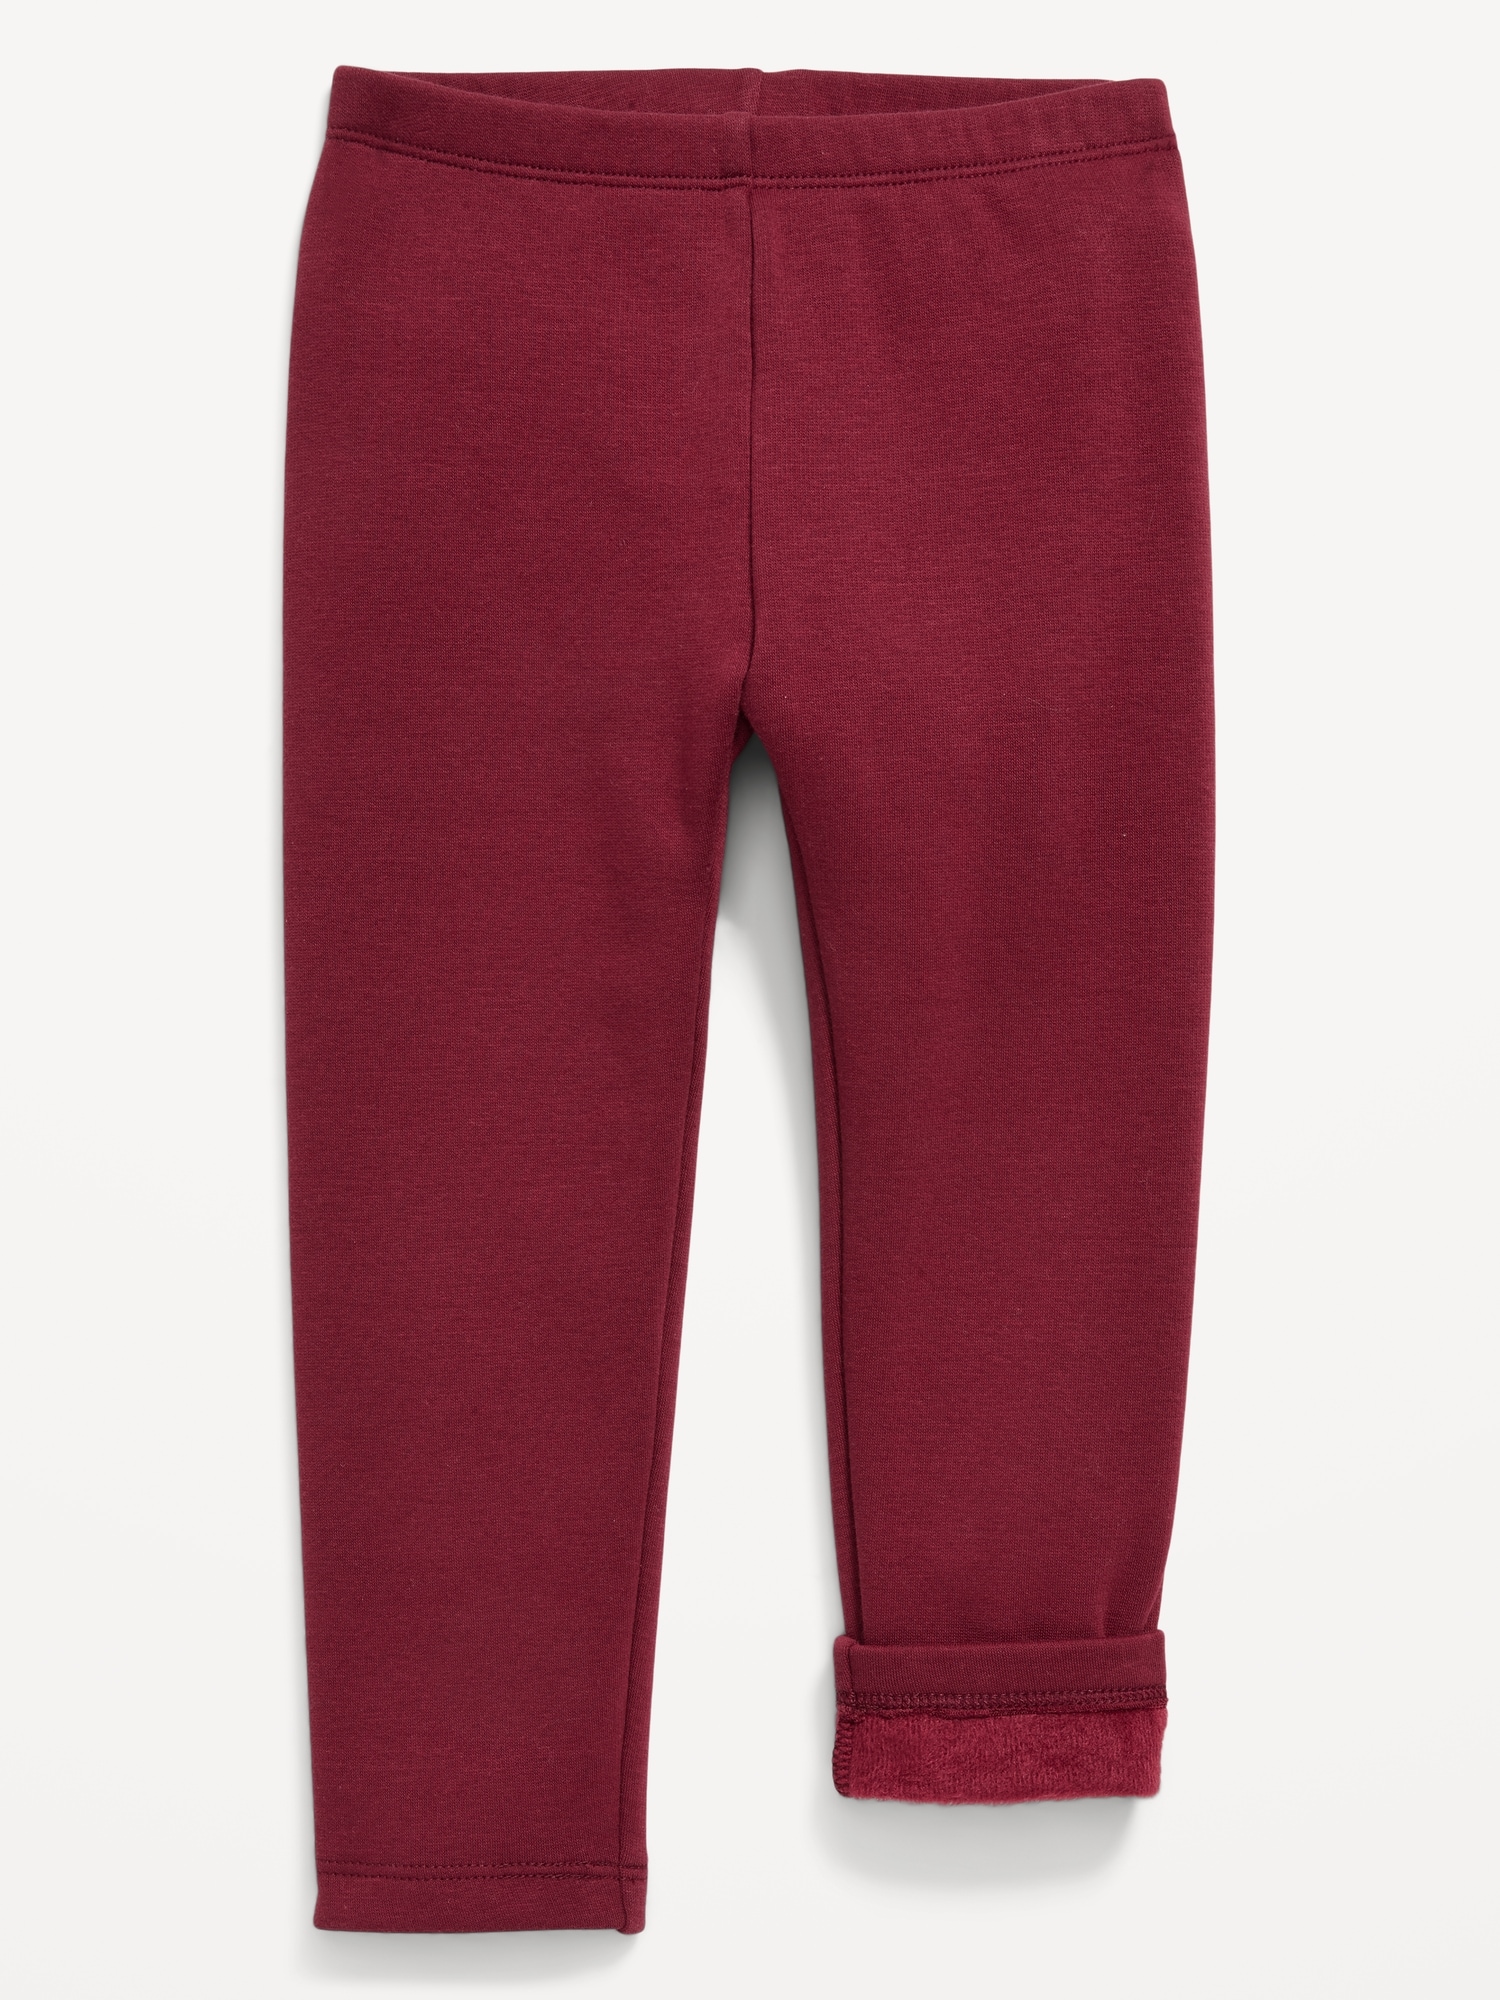 Kids Solid Fleece Lined Jogger Pants - Heather — Baby Steps and